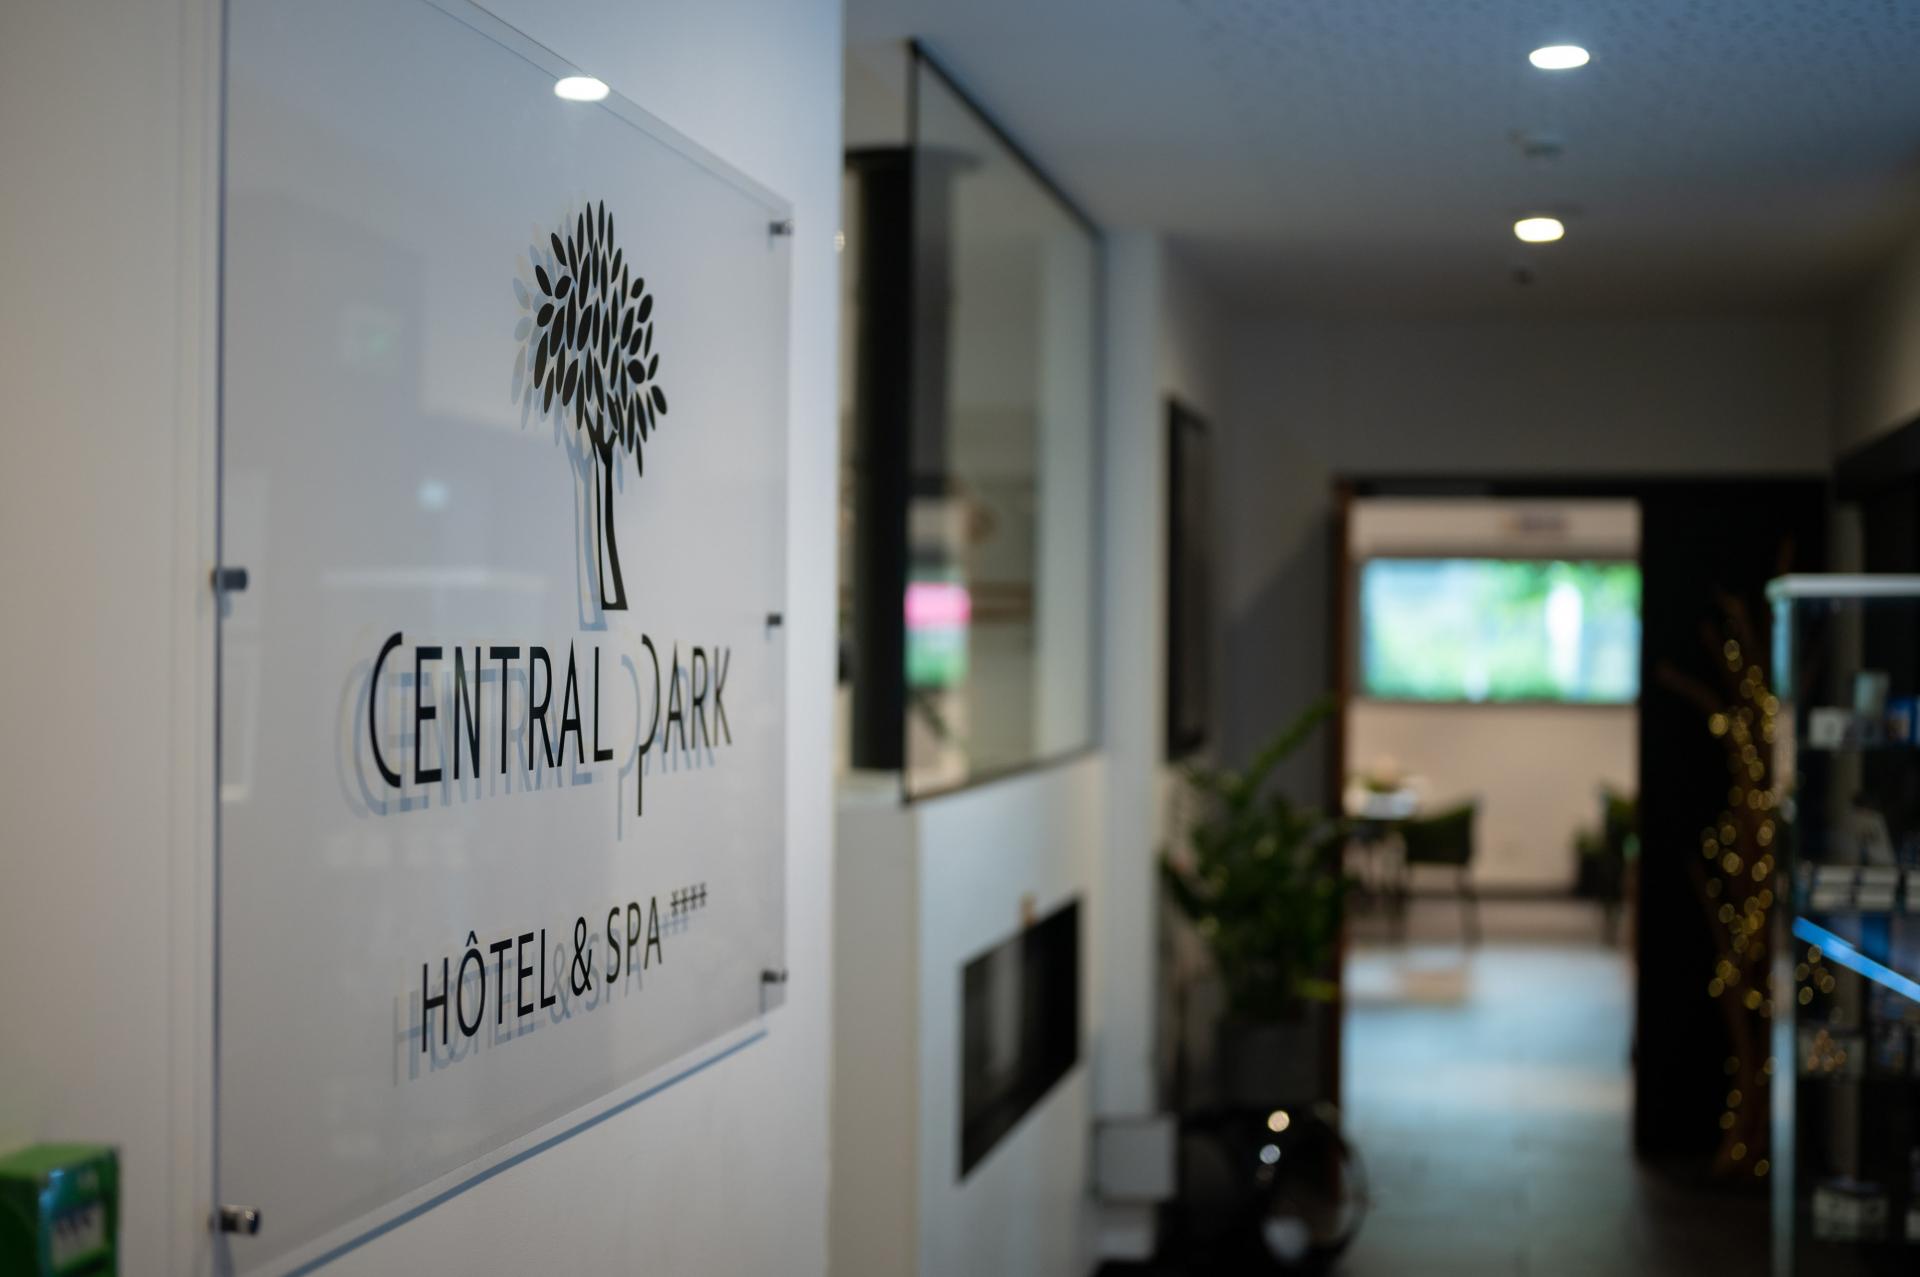 Central Park - Hotel